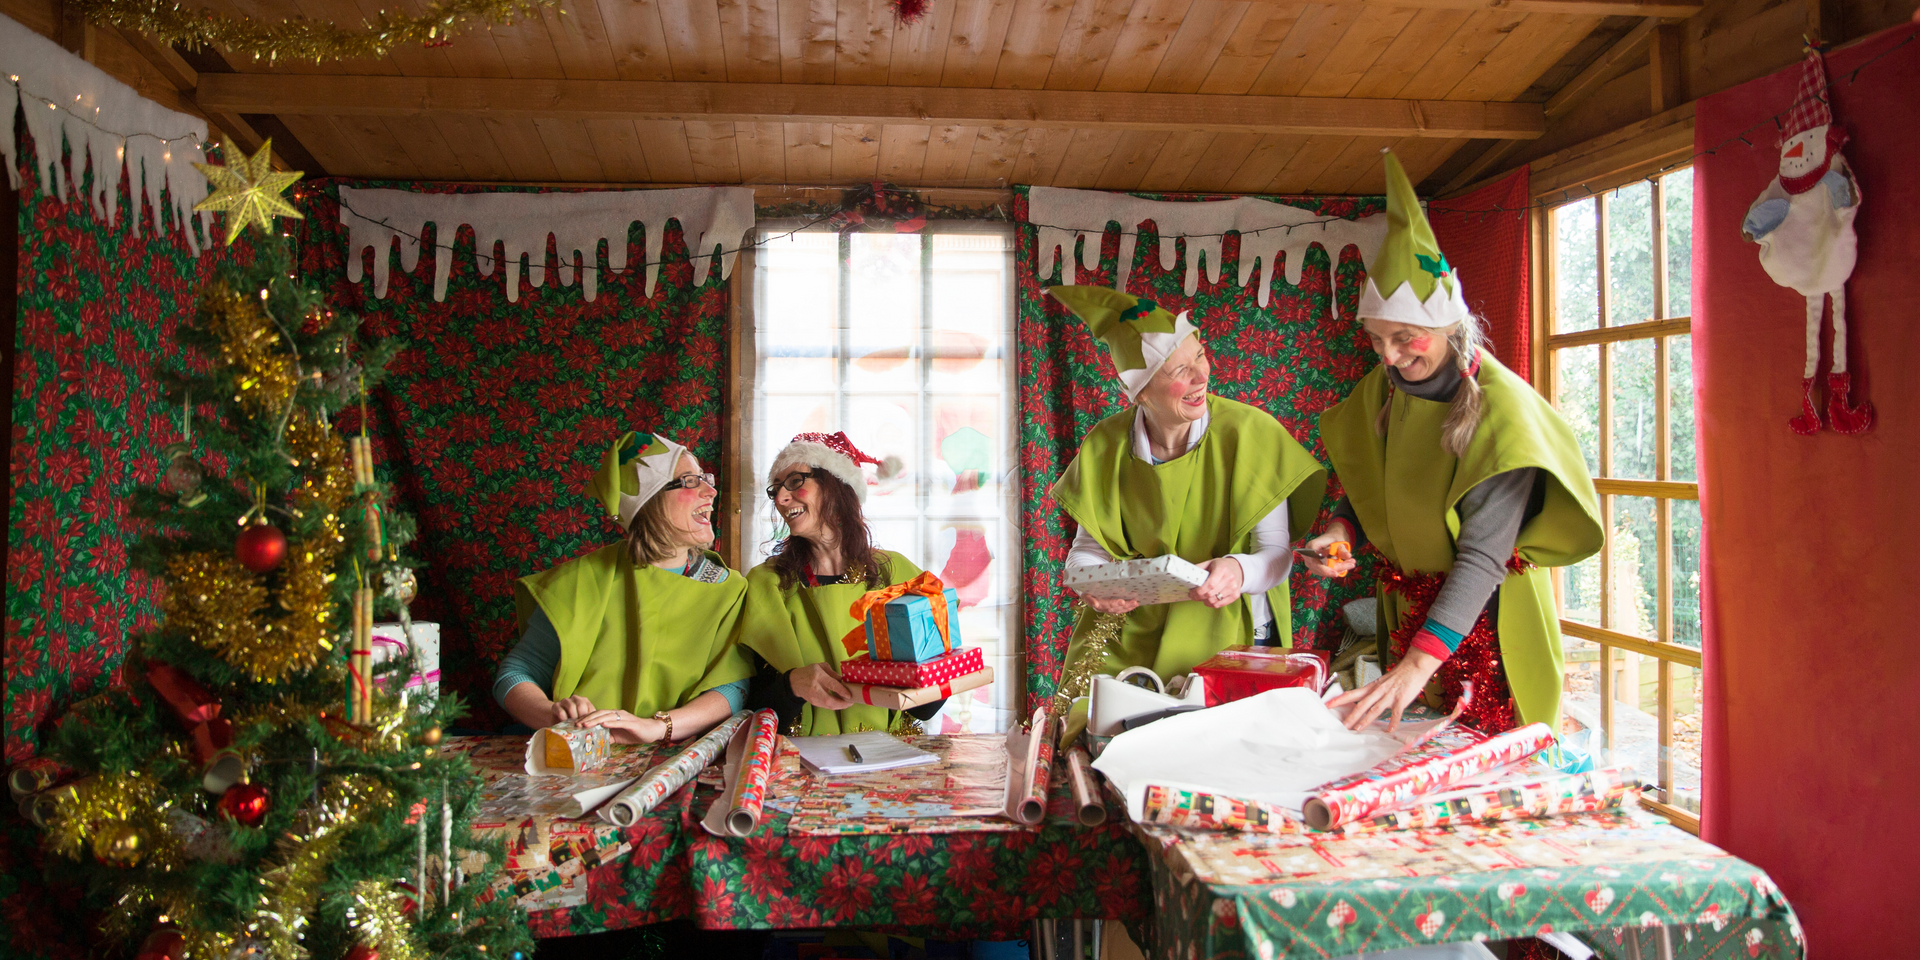 4 of Santa's elves building toys in Santa's workshop. They are wearing green elf outfits. 